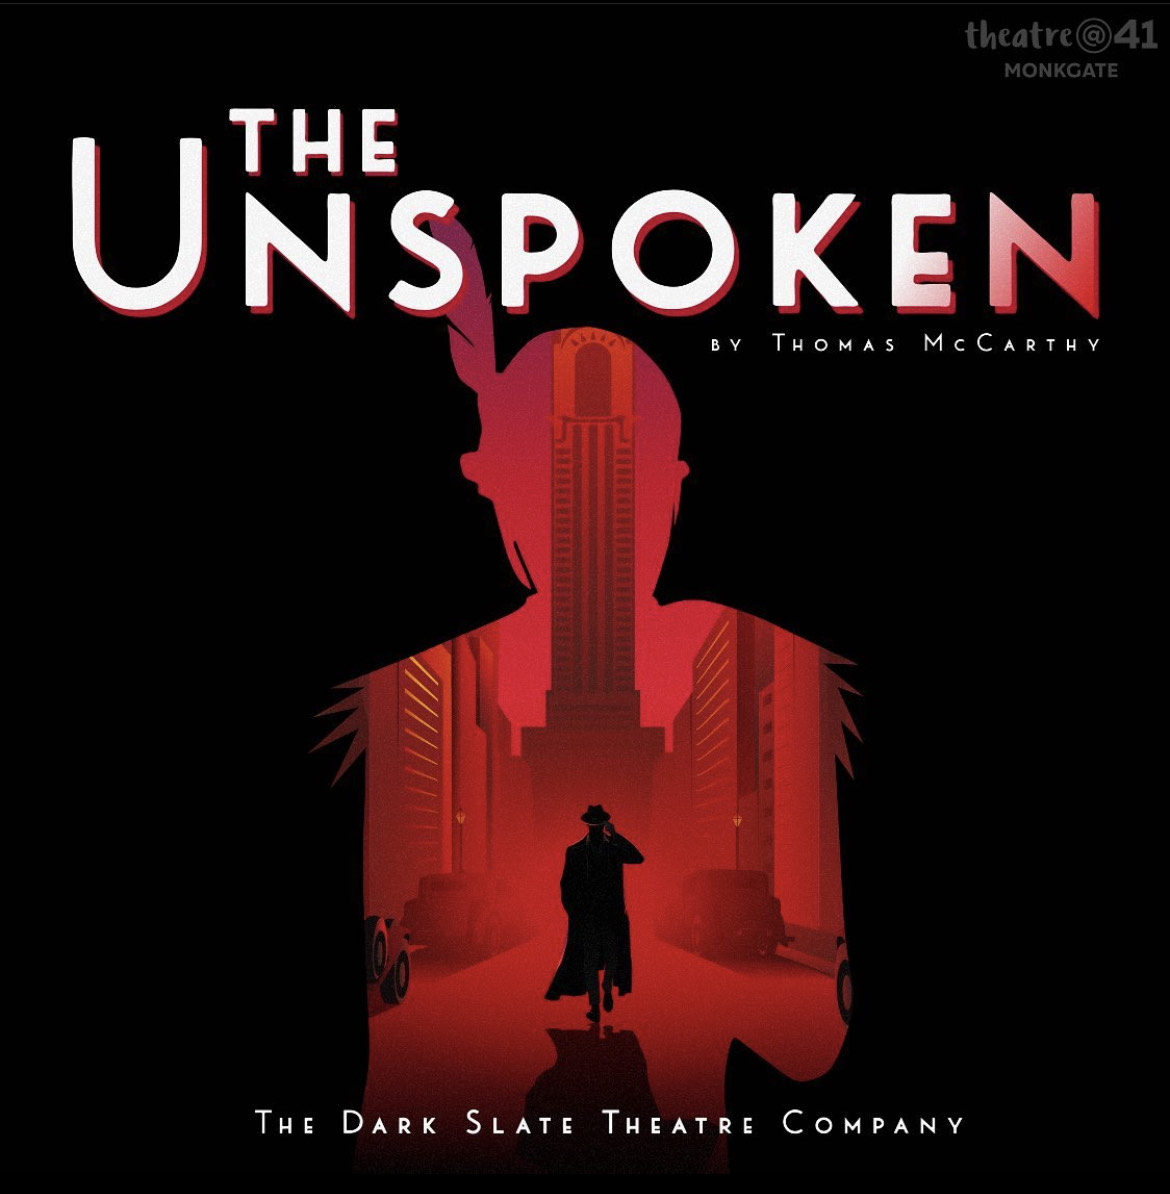 Dark Slate Theatre bring 'The Unspoken' to Theatre@41 from 11th-13th June! After his wife launches a plot to overthrow his former boss, a bartender of a New York speakeasy finds himself in a power struggle that grips the city's criminal underworld. Tickets:tickets.41monkgate.co.uk